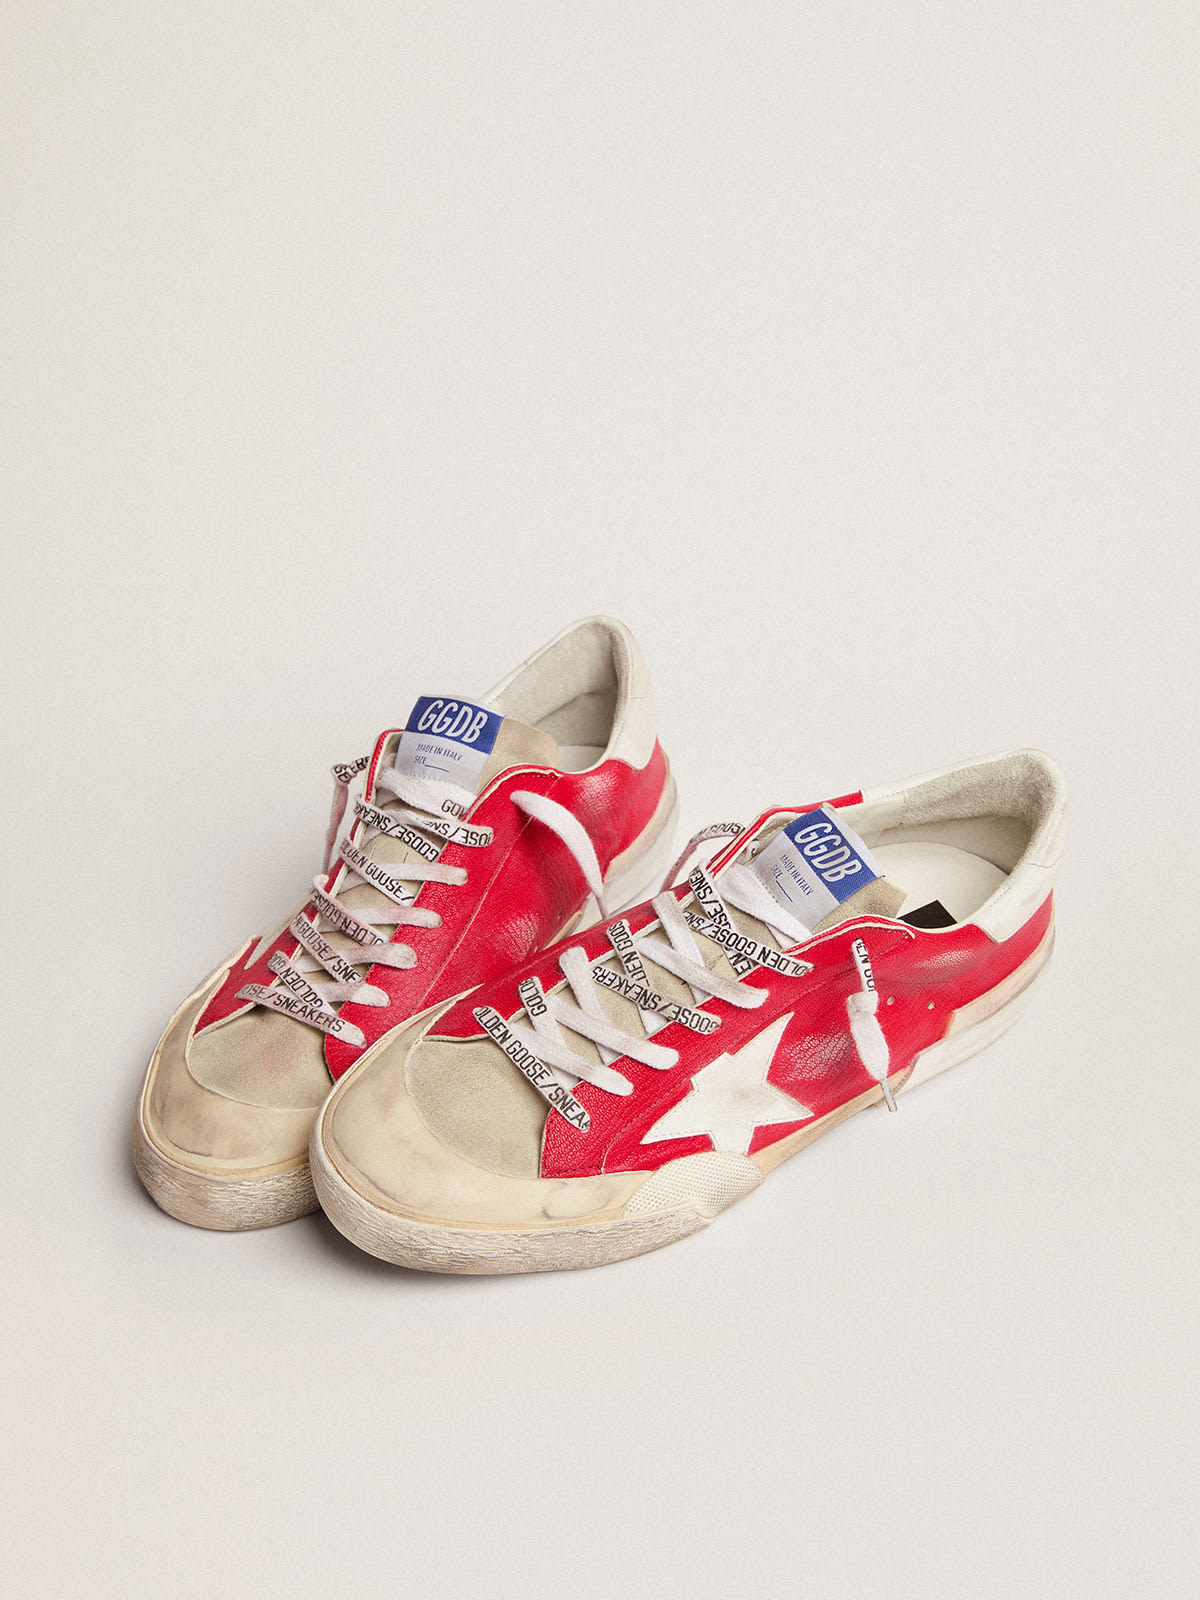 Golden Goose - Super-Star sneakers in red nappa leather with white leather star and heel tab in 